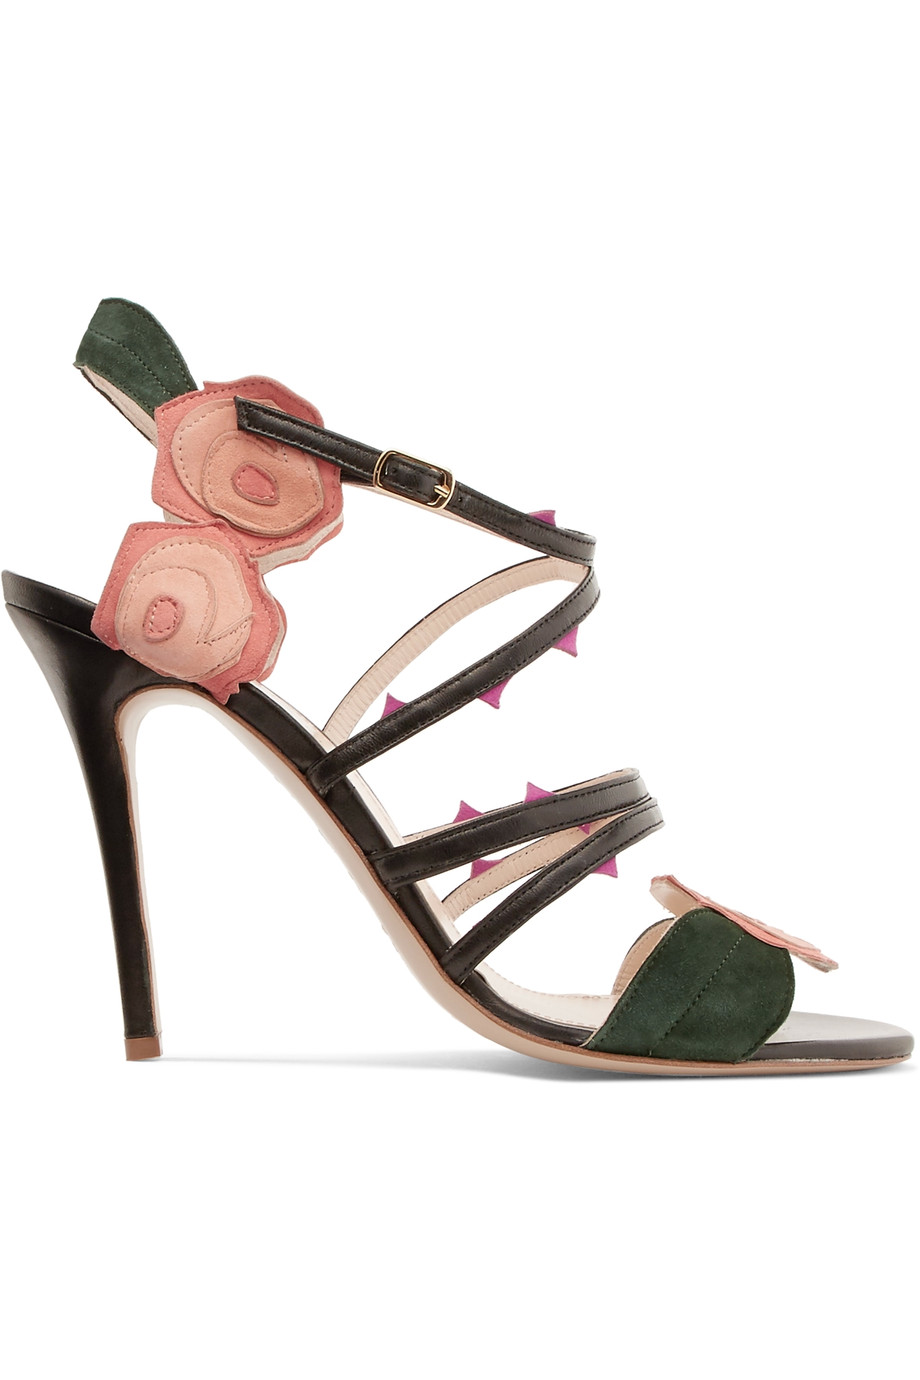 Camilla Elphick Coming Up Roses Embroidered Suede And Leather Sandals ...